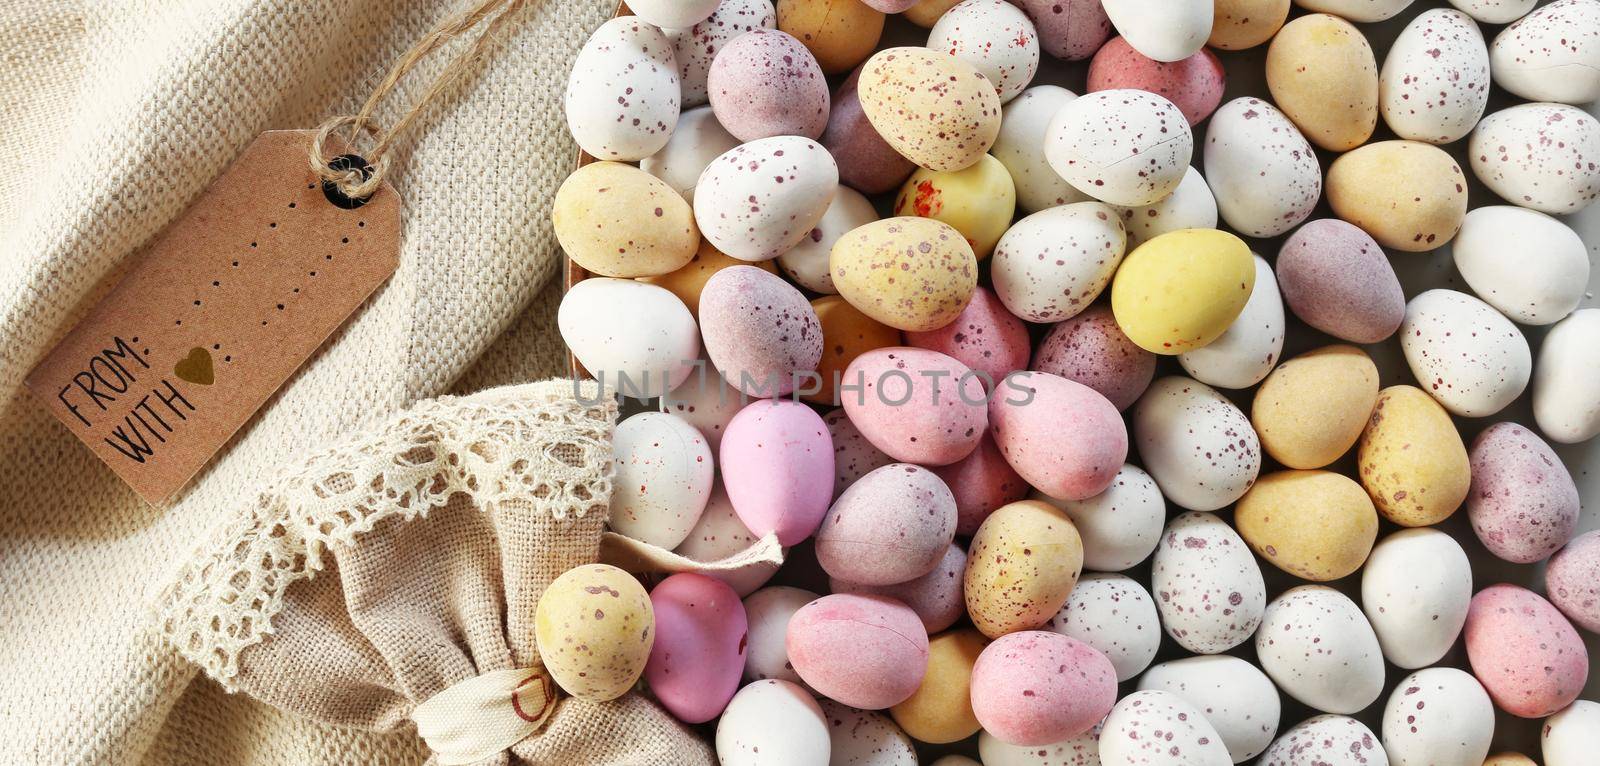 Easter eggs background with colourful eggs with gift tag. Sun light over Easter eggs